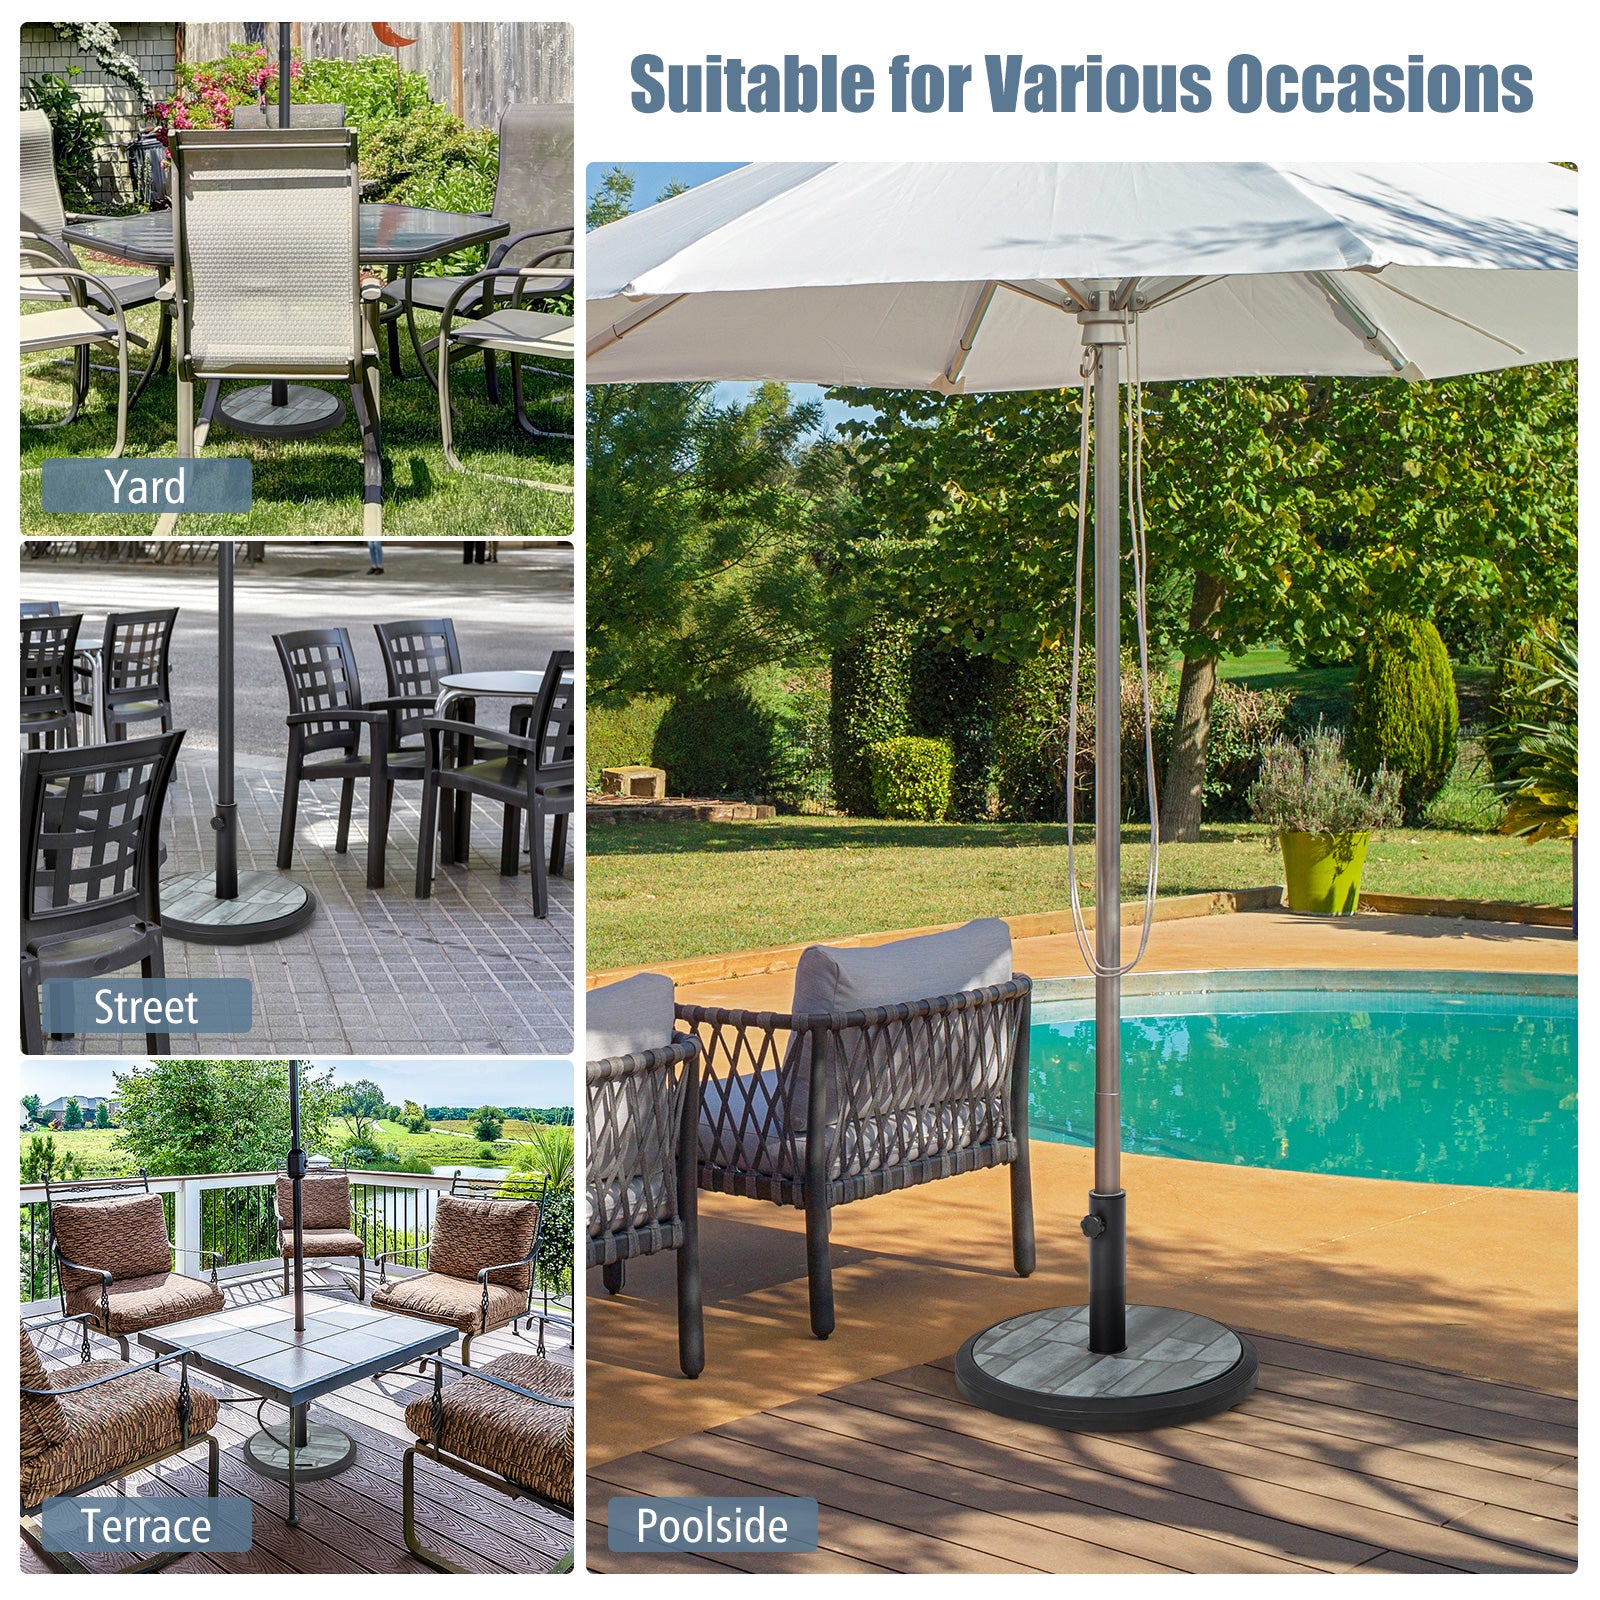 Wide Range of Applications: With overall dimensions of 19" x 12.5" (Dia. x H) and a net weight of 35 lbs, this round umbrella stand is a versatile addition to your outdoor space. It is suitable for various occasions, including patios, poolside areas, yards, streets, terraces, decks, lawns, gardens, and other settings, as well as for commercial use.